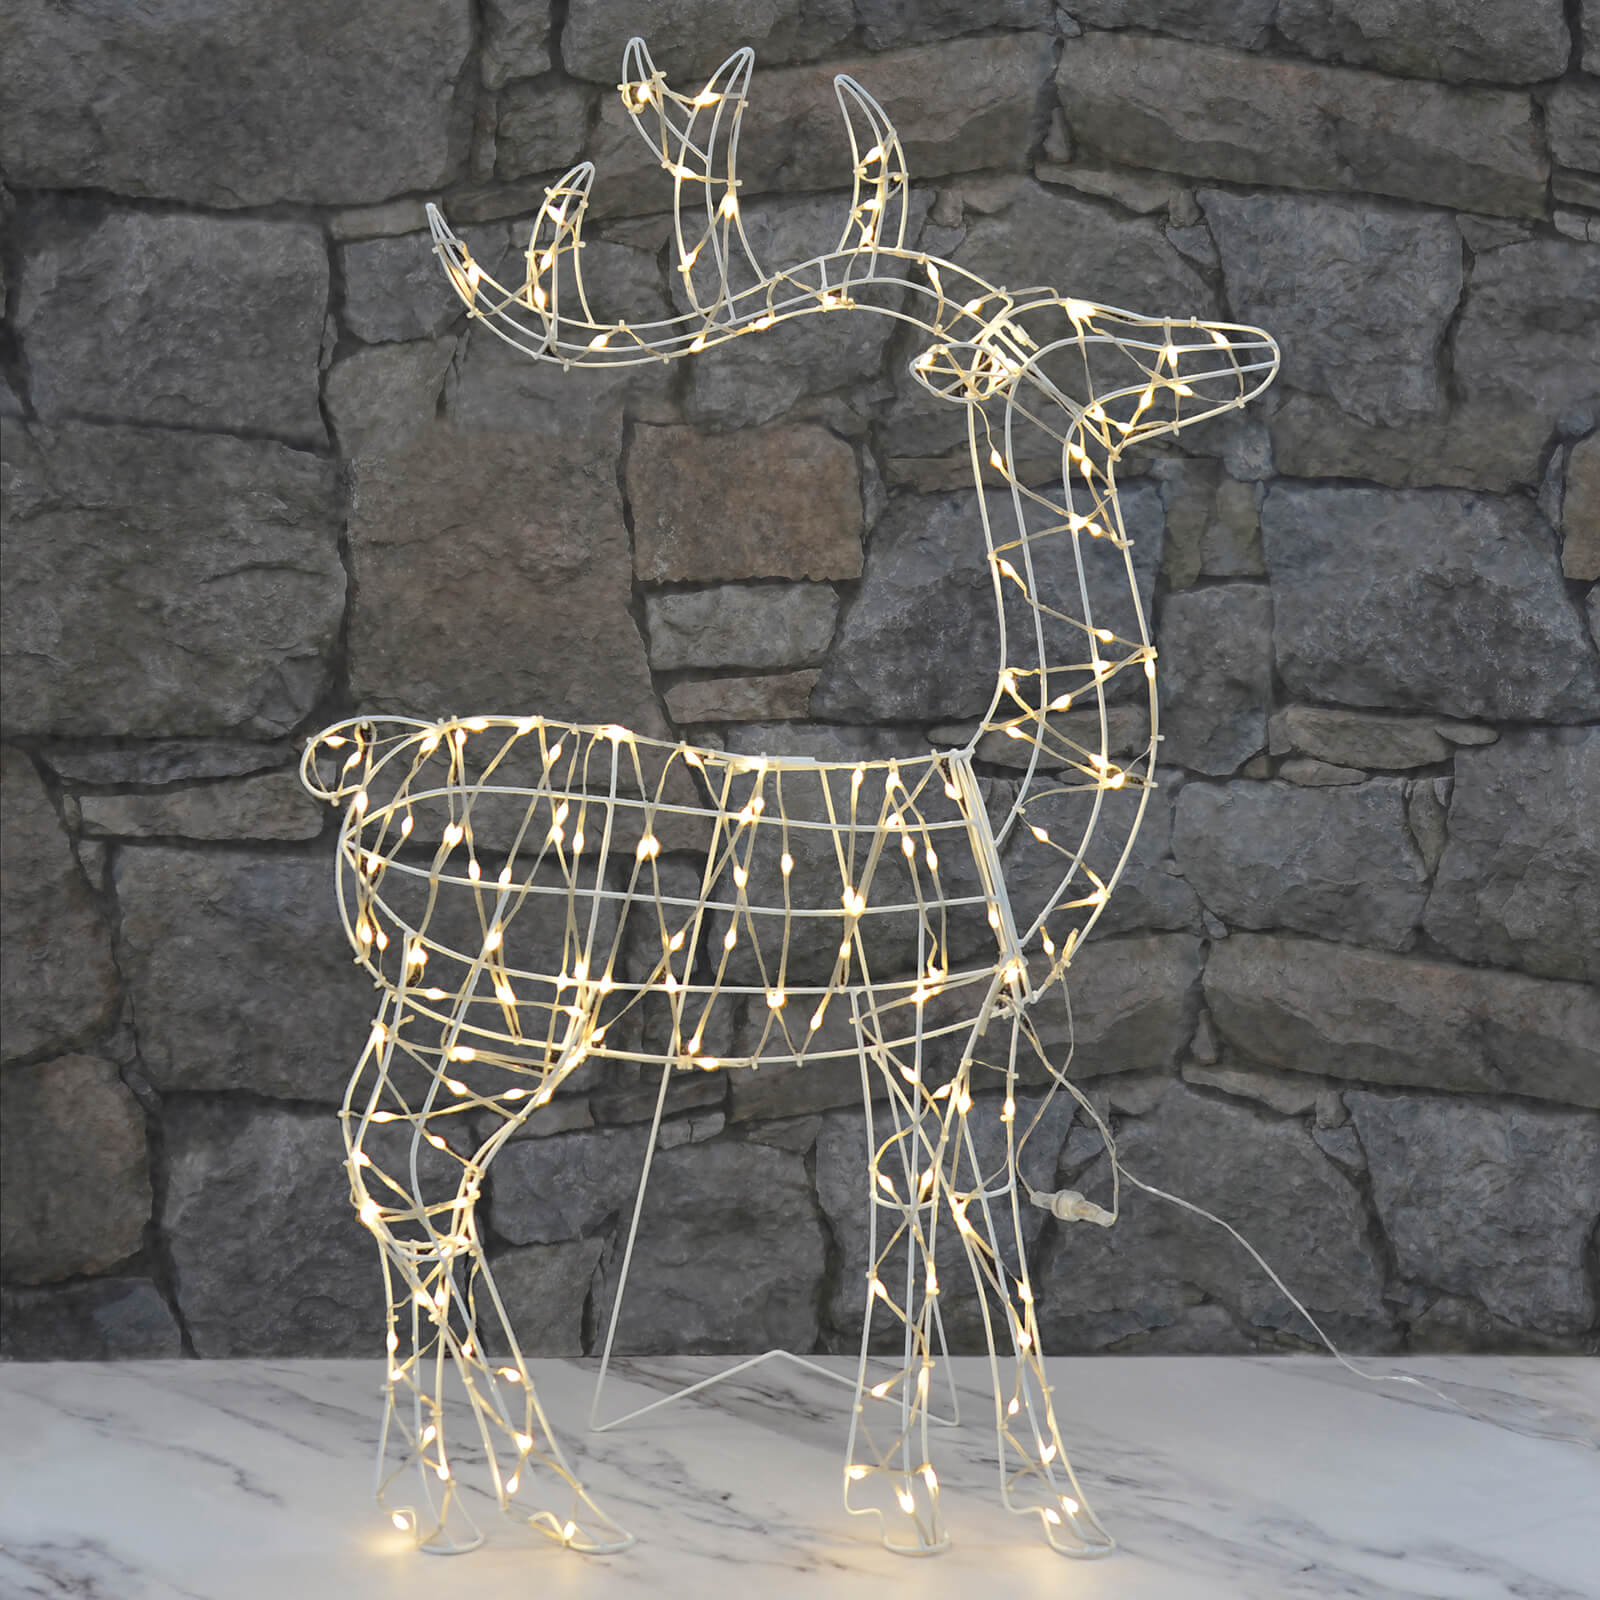 Light up reindeer silhouette Christmas decoration lit by warm white LED lights standing on a patio with brick wall background